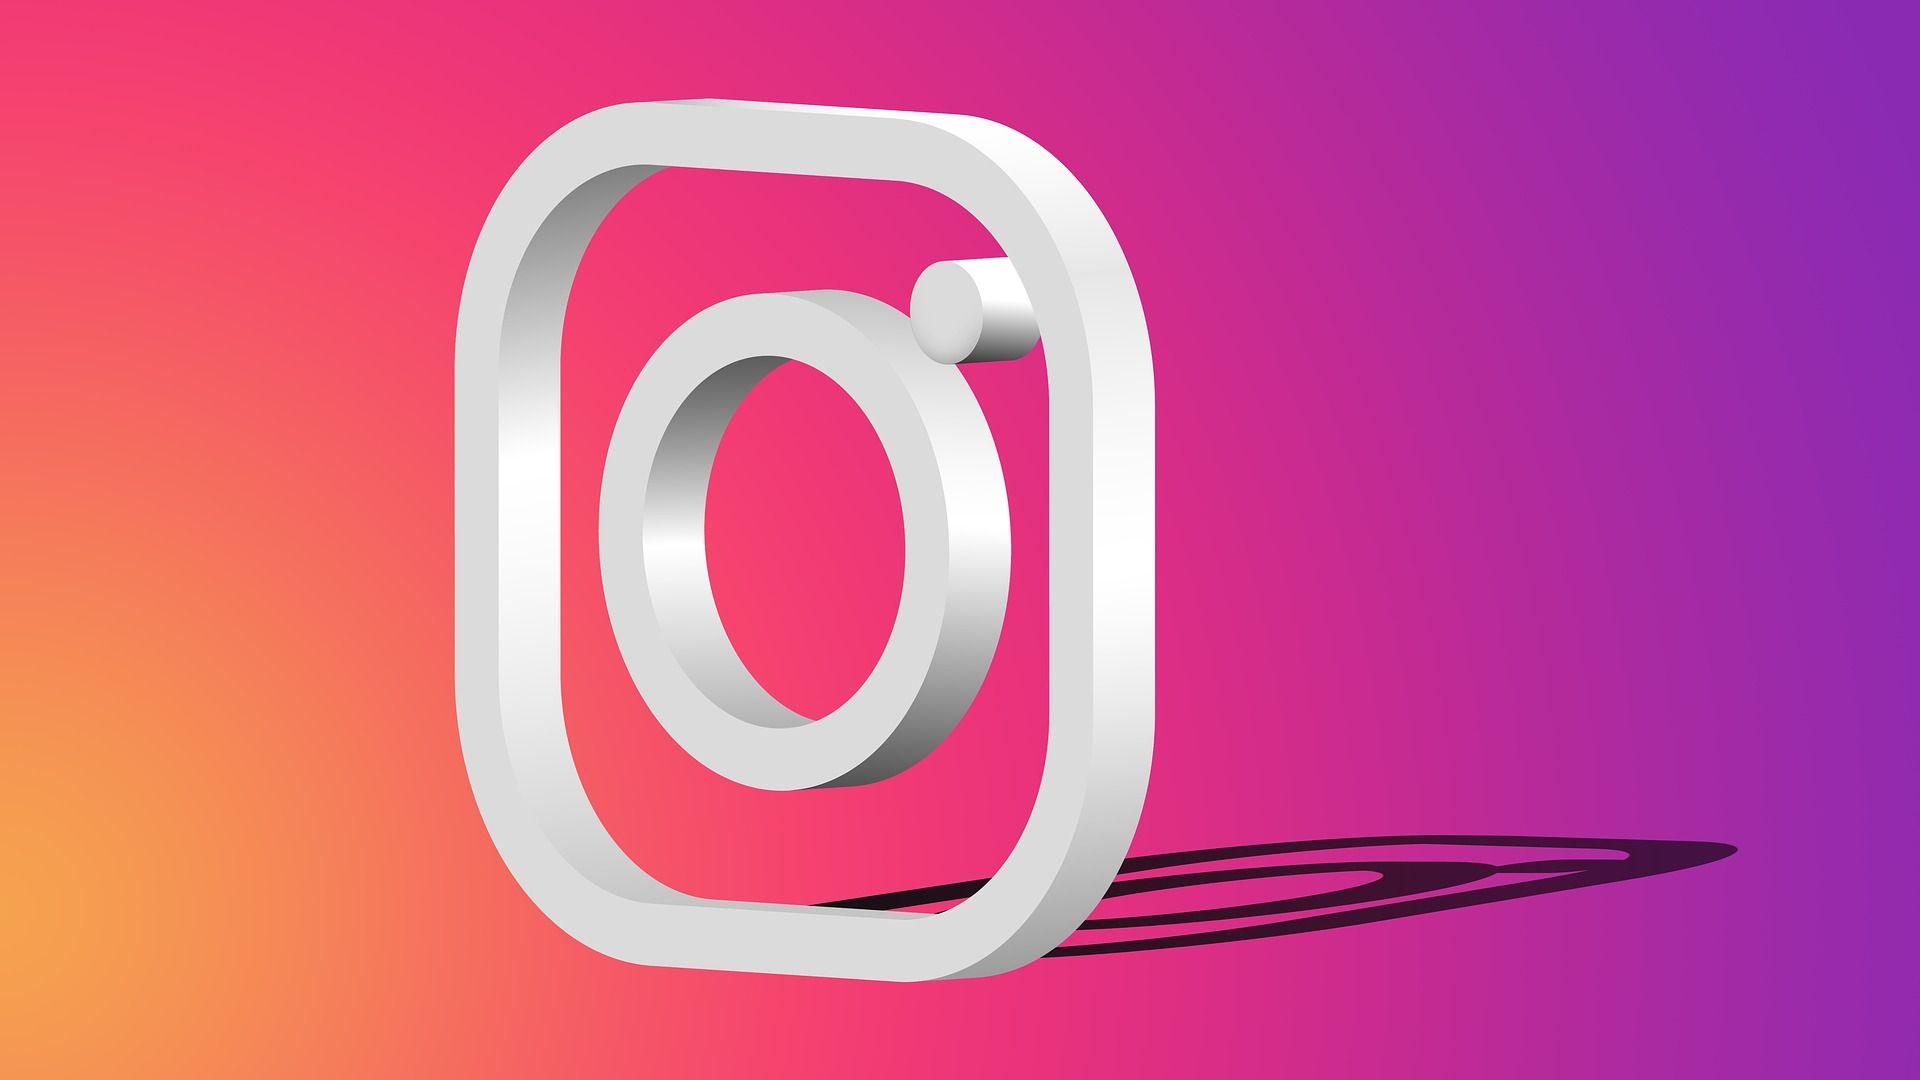 Buy Instagram likes fast and allow your business attain more